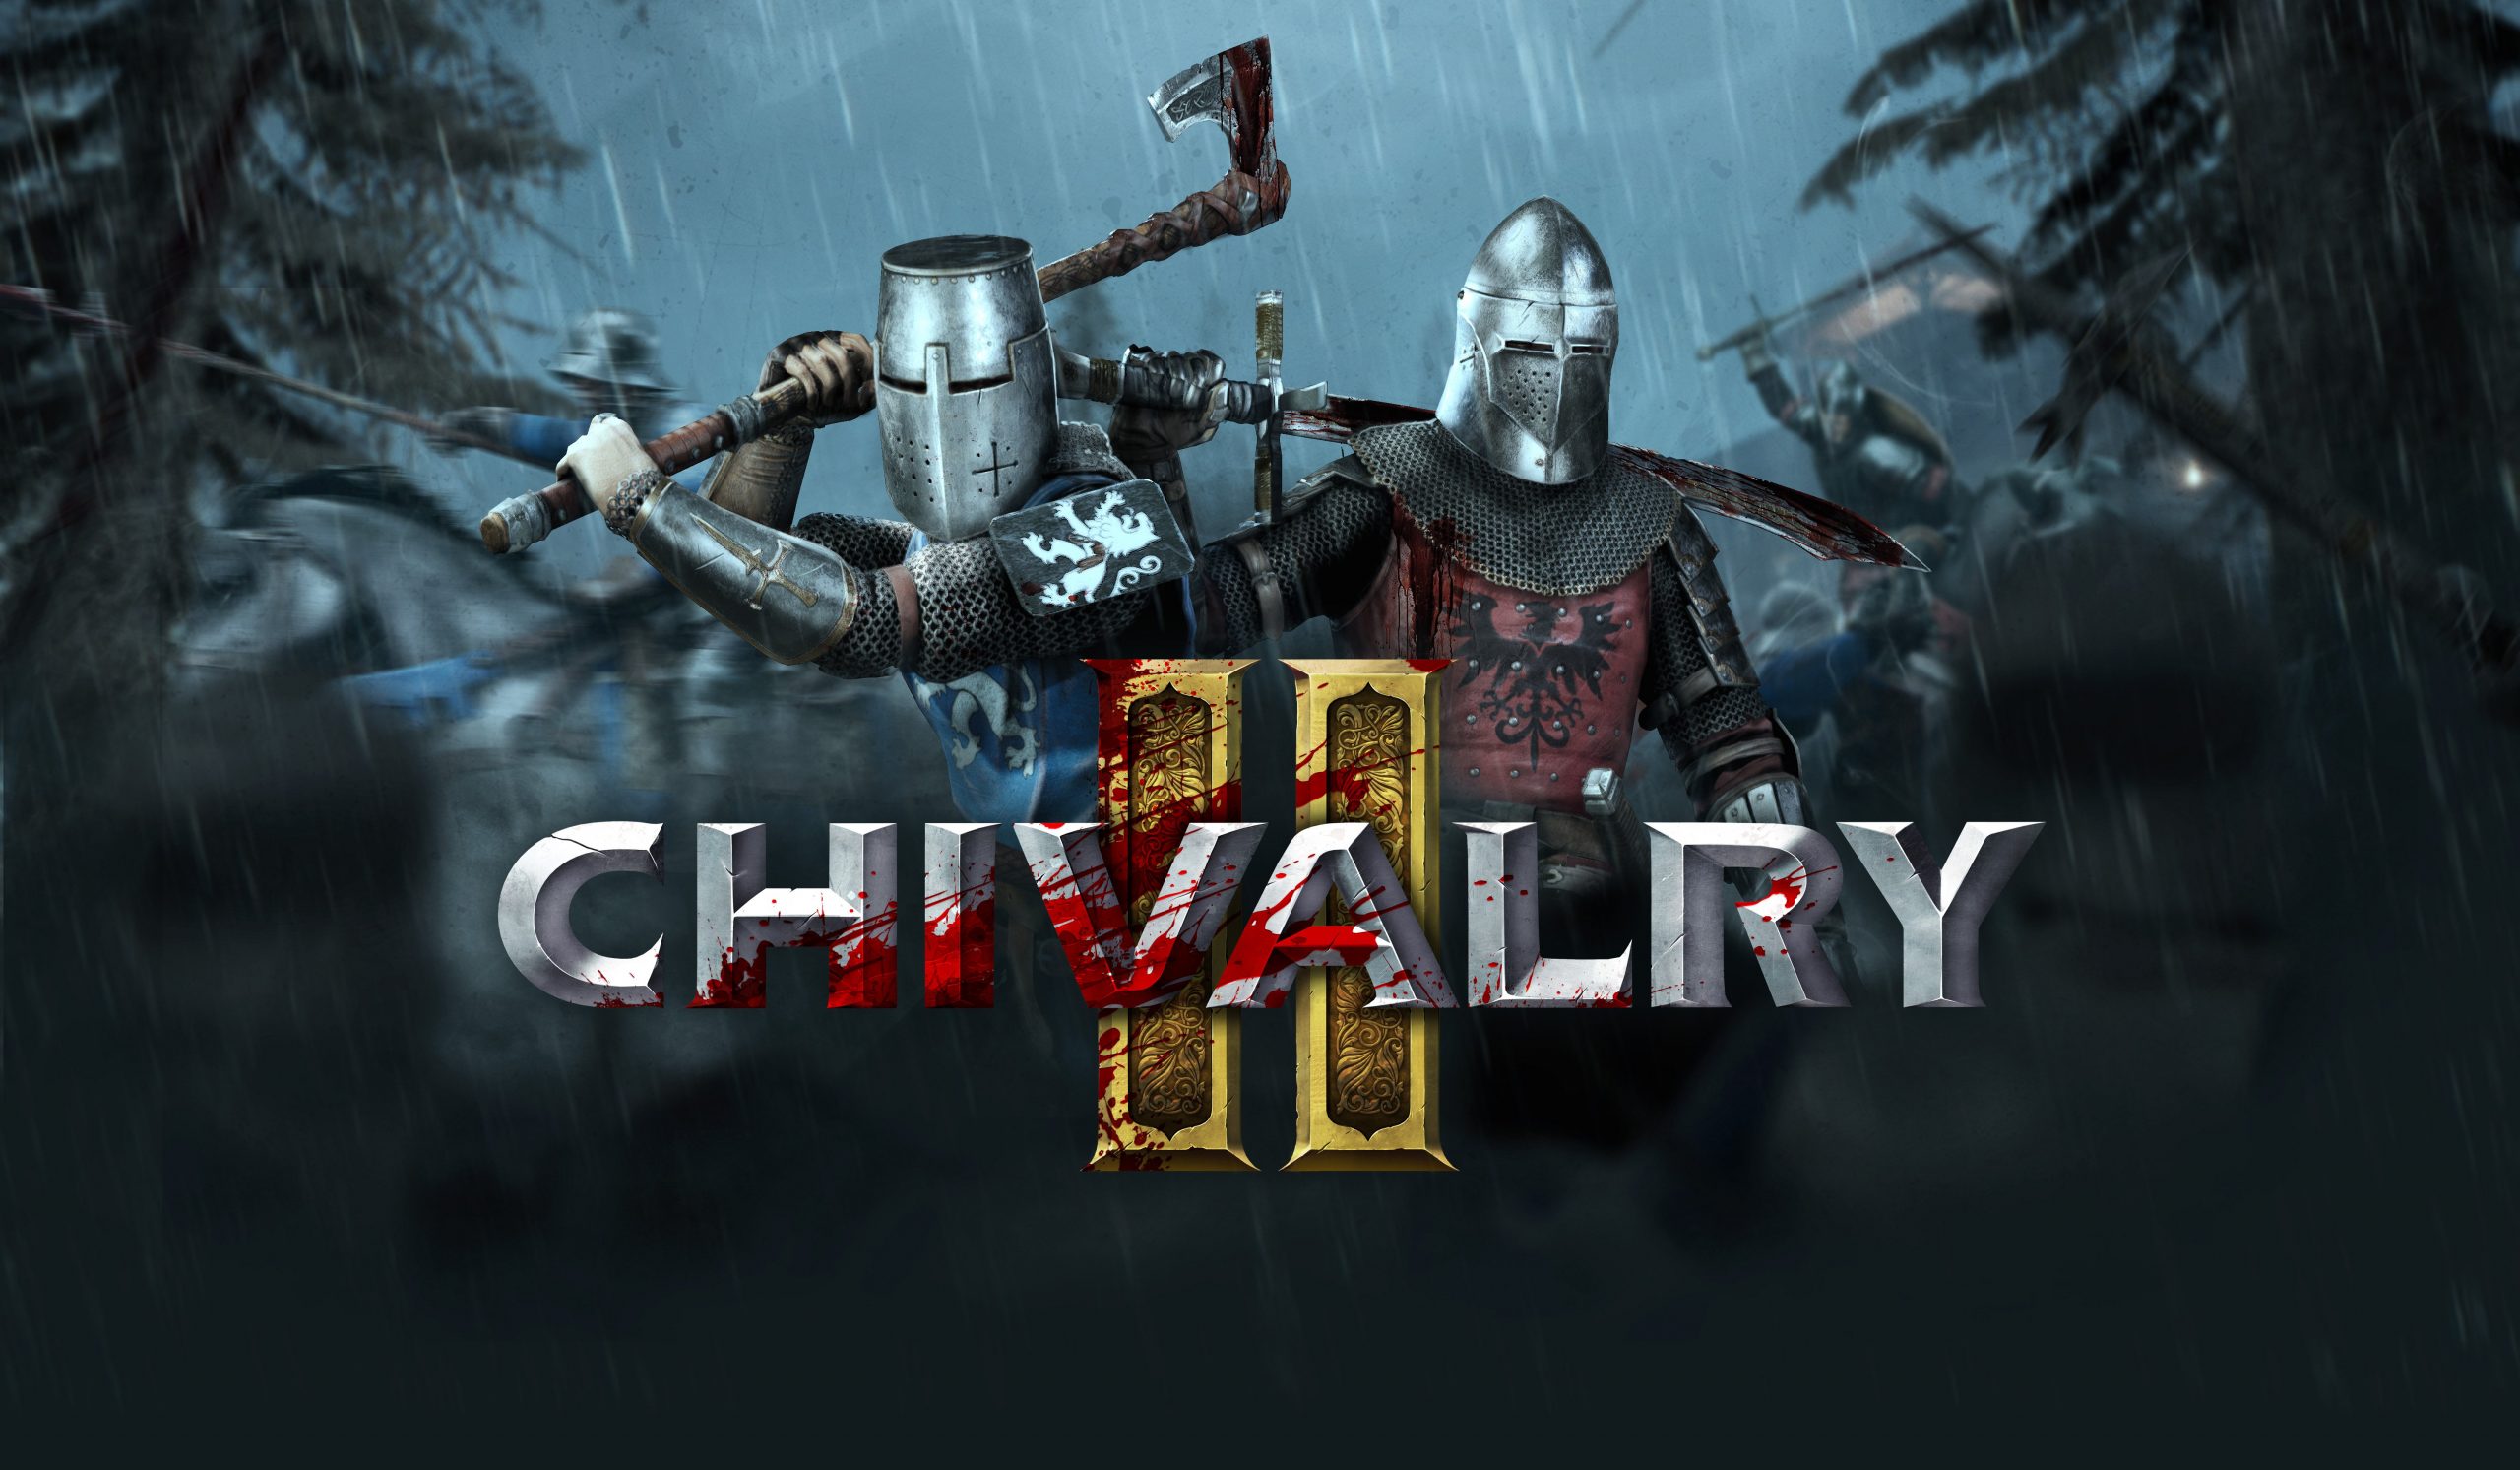 Chivalry 2 Tips and Tricks Guide